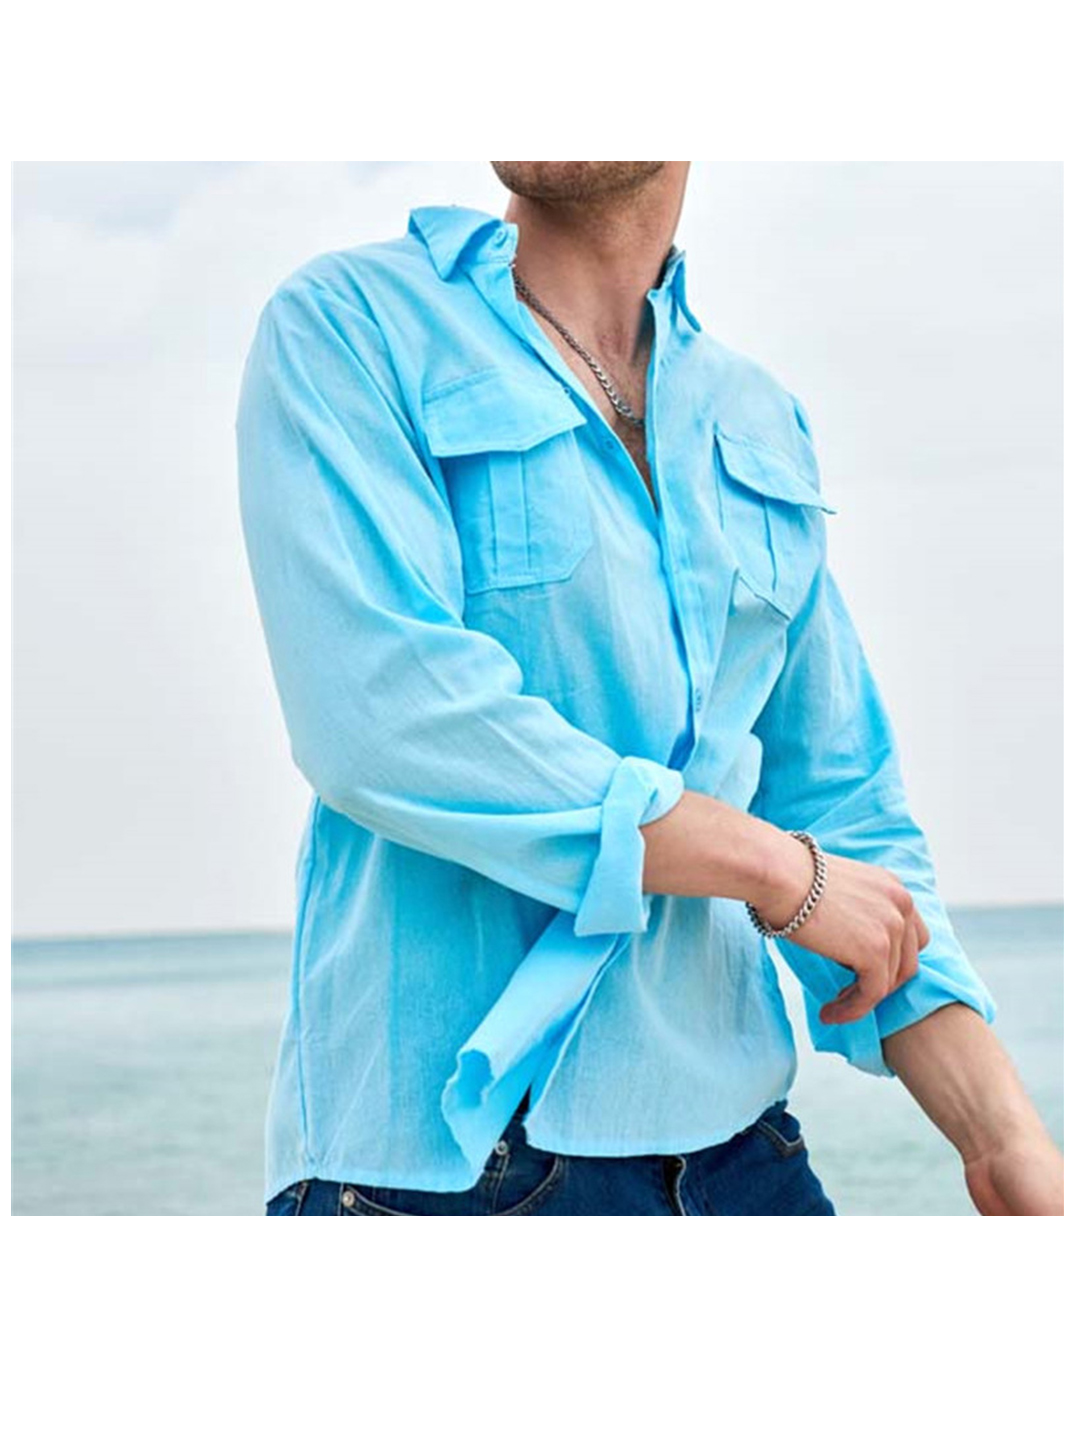 Men's Percy Solid Color Casual Double Pocket Shirt-poisonstreetwear.com